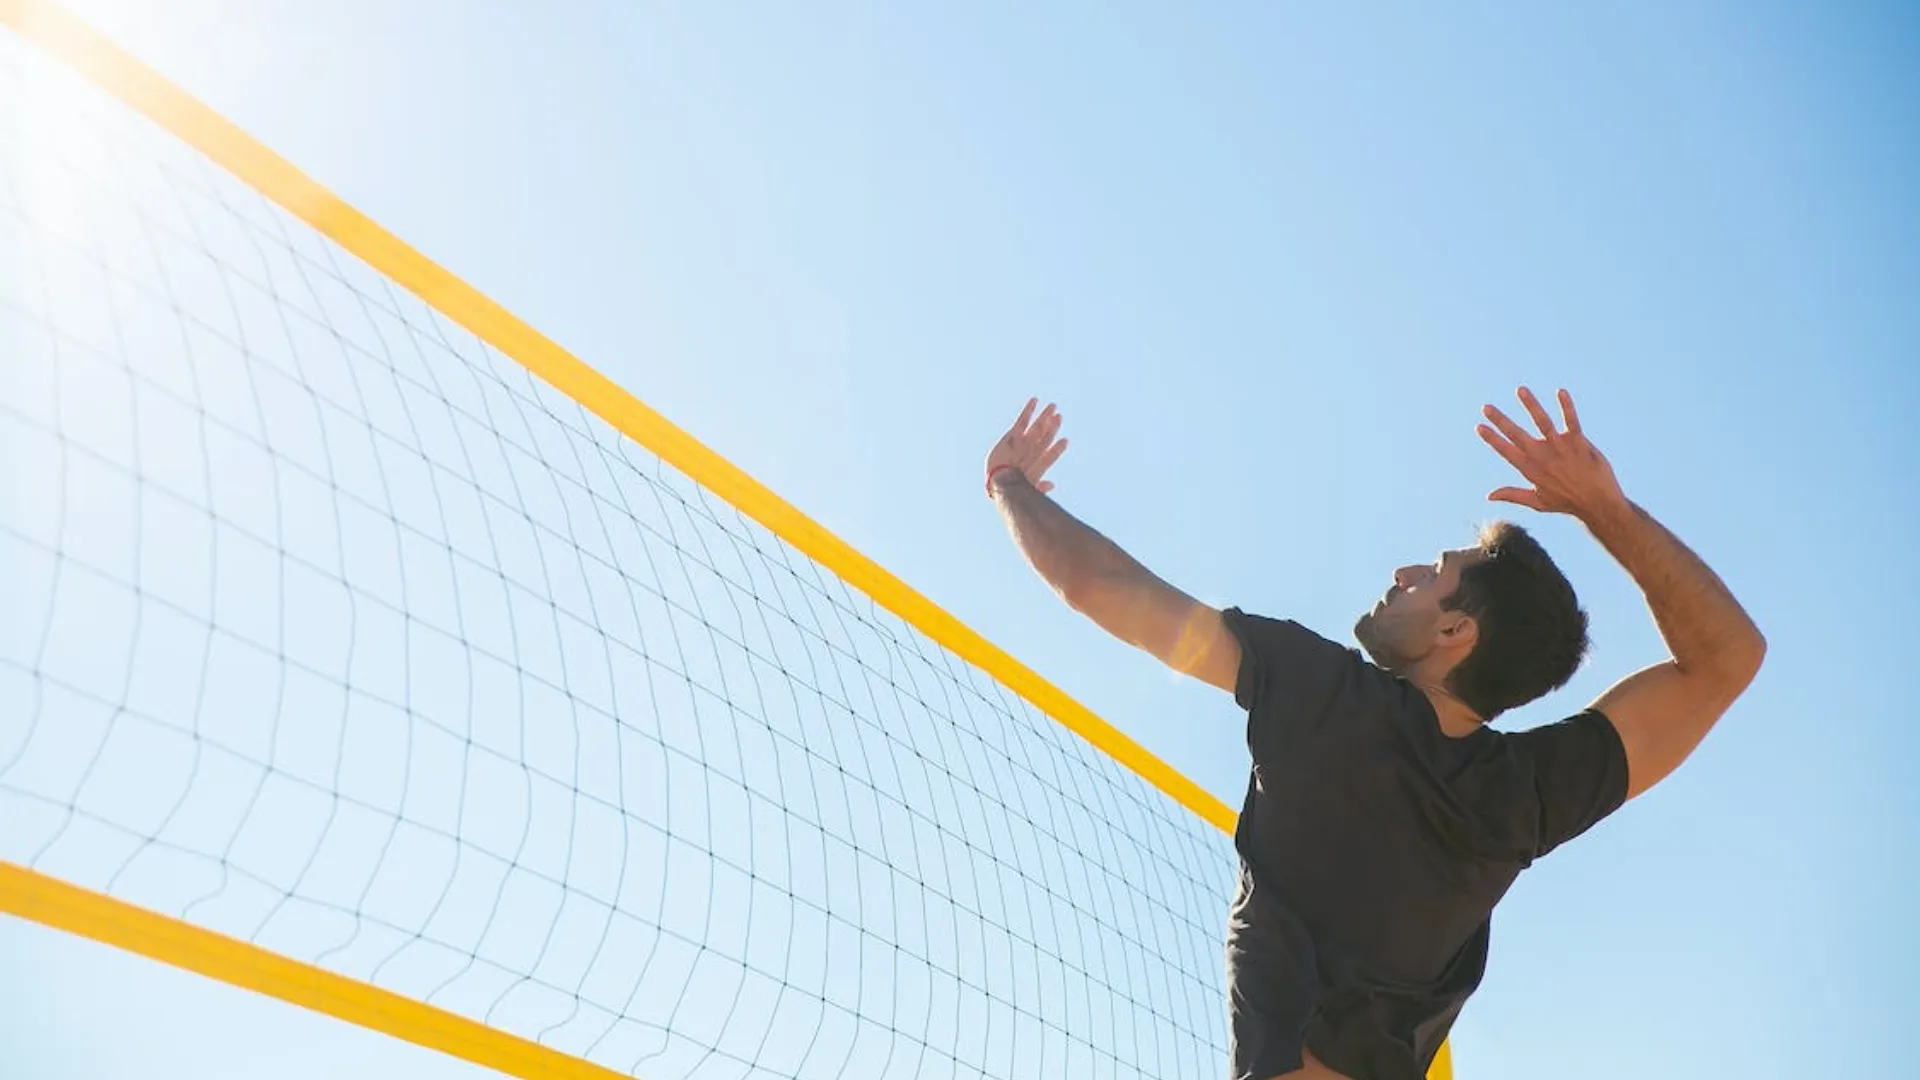 How To Underhand Serve In Volleyball – 4 Easy Steps and Cues